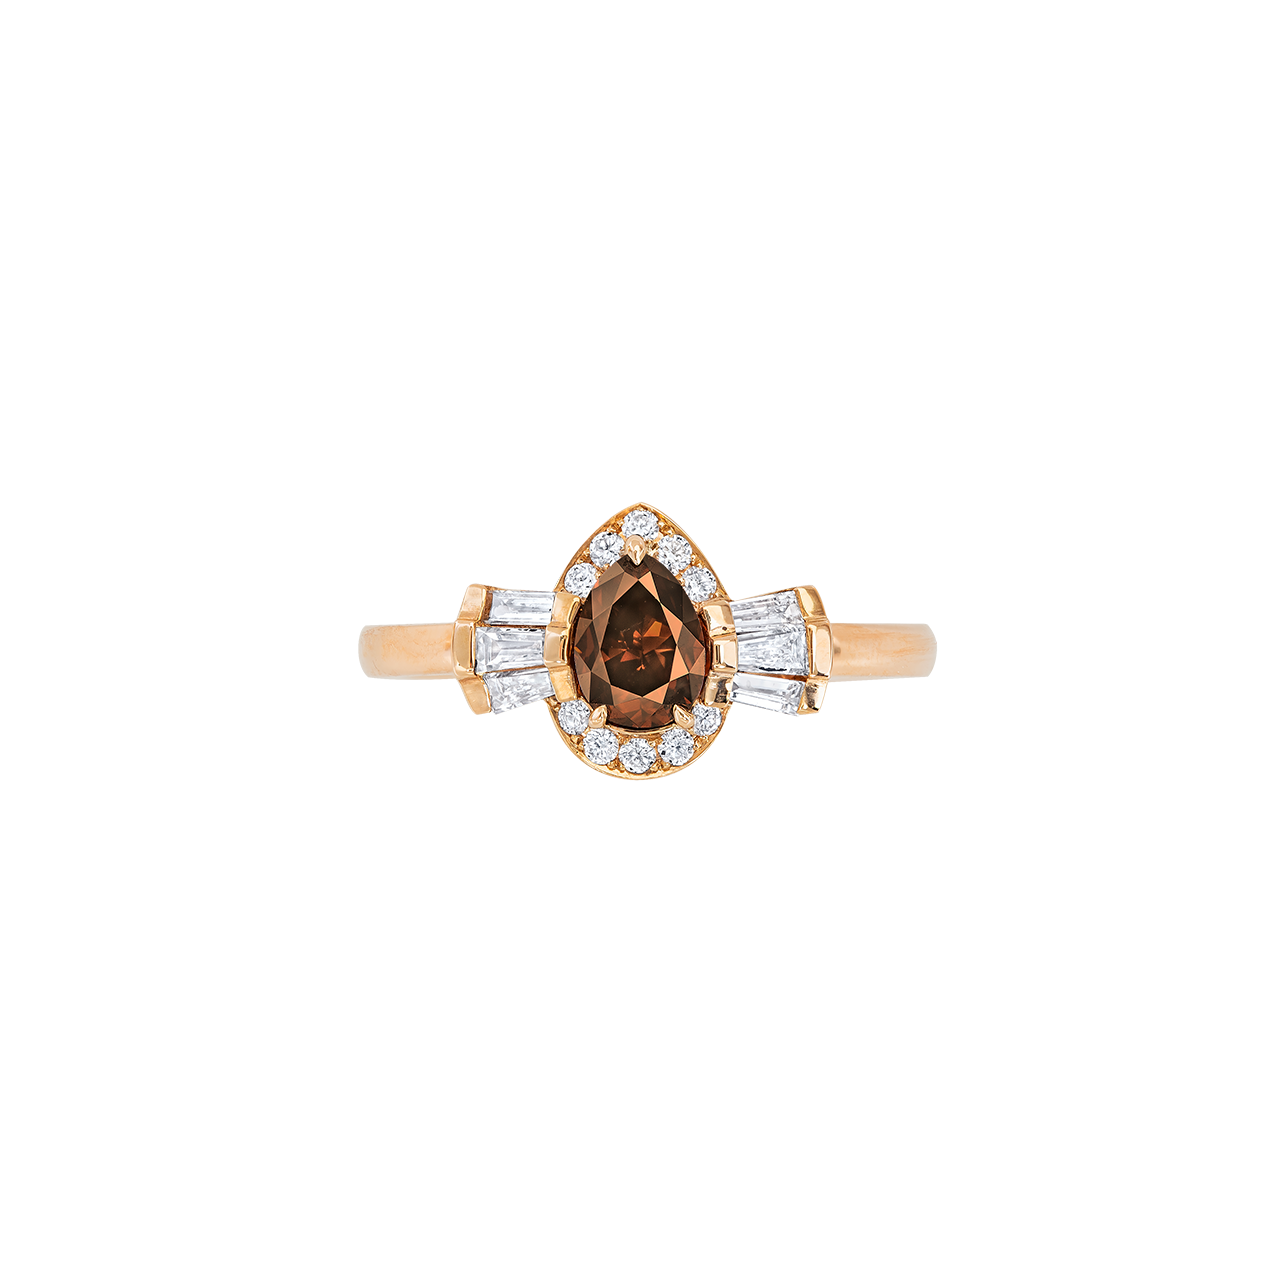 GIA 0.78克拉 巧克力彩鑽戒
Fancy Brown Colored
and Diamond Ring